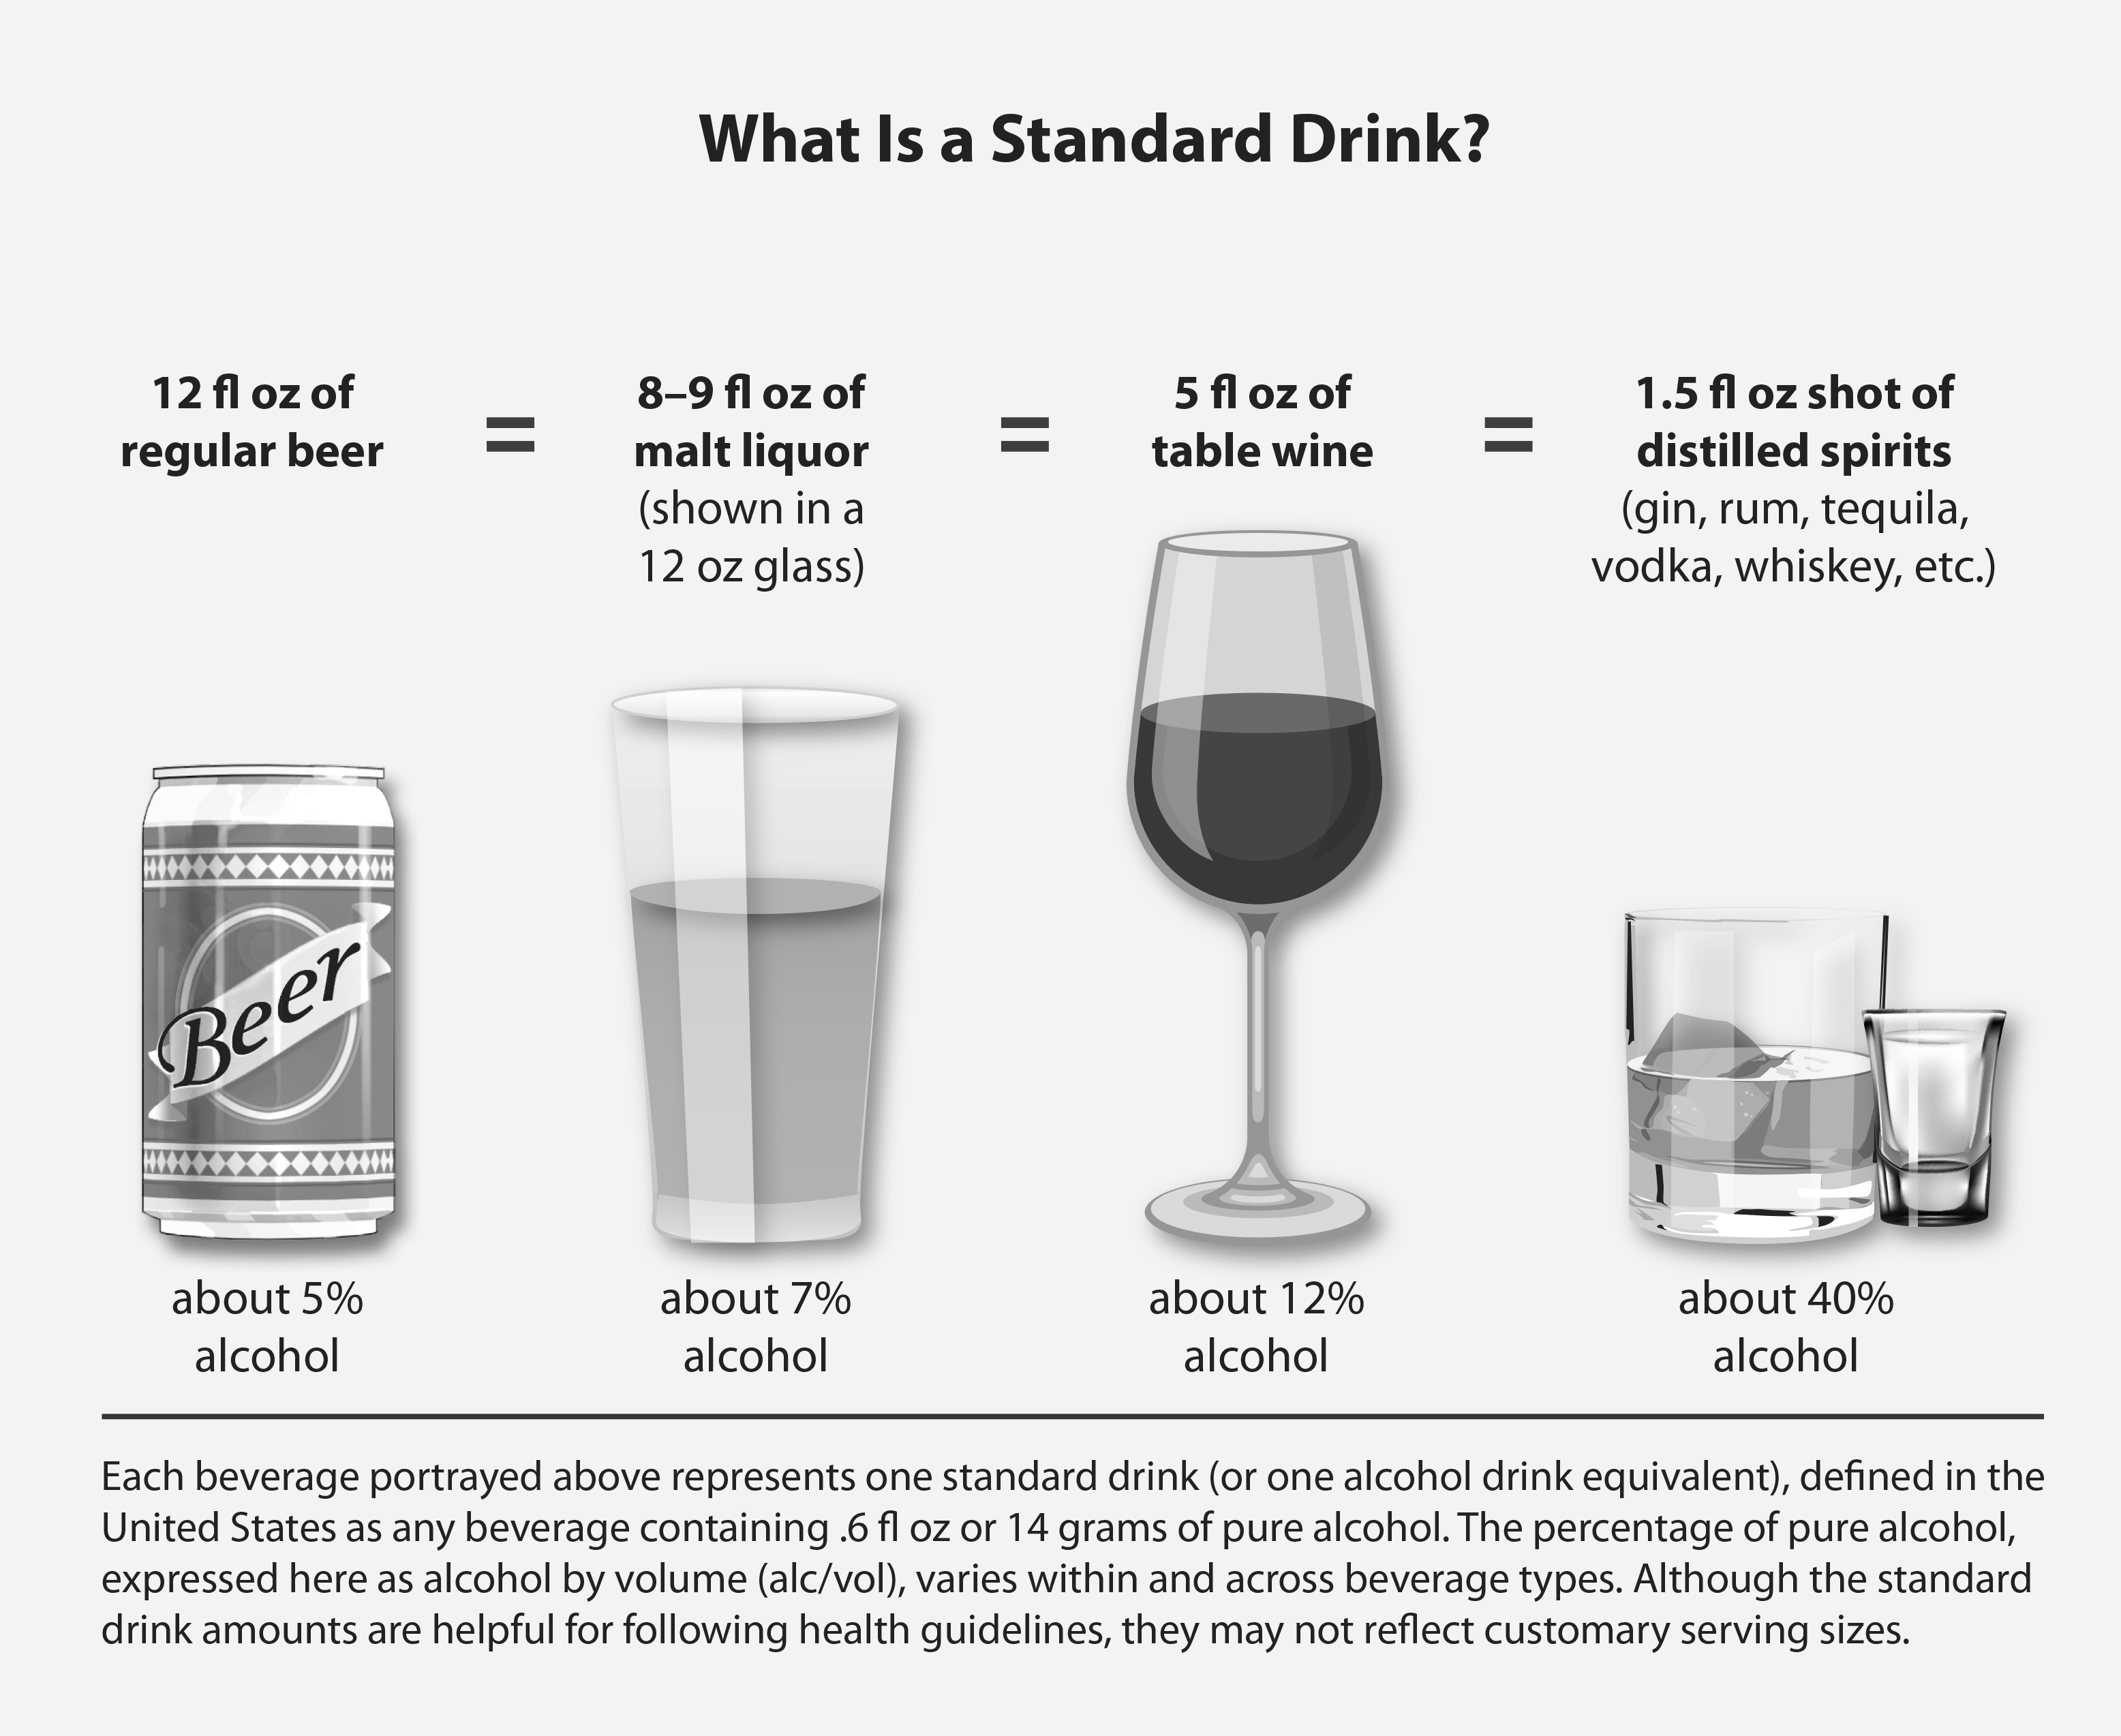 What is a standard drink? 12 fluid ounces of regular beer equals 8 to 9 fluid ounces of malt liquor showing in a 12 ounce glass, equals 5 fluid ounces of table wine, equals 1.5 fluid ounces of distilled spirits. Each beverage portrayed above represents one standard drink (or one alcohol drink equivalent), defined in the United States as any beverage containing .6 fluid ounces or 14 grams of pure alcohol. The percentage of pure alcohol, expressed here as alcohol by volume (alc/vol), varies within and across beverage types. Although the standard drink amounts are helpful for following health guidelines, they may not reflect customary serving sizes.